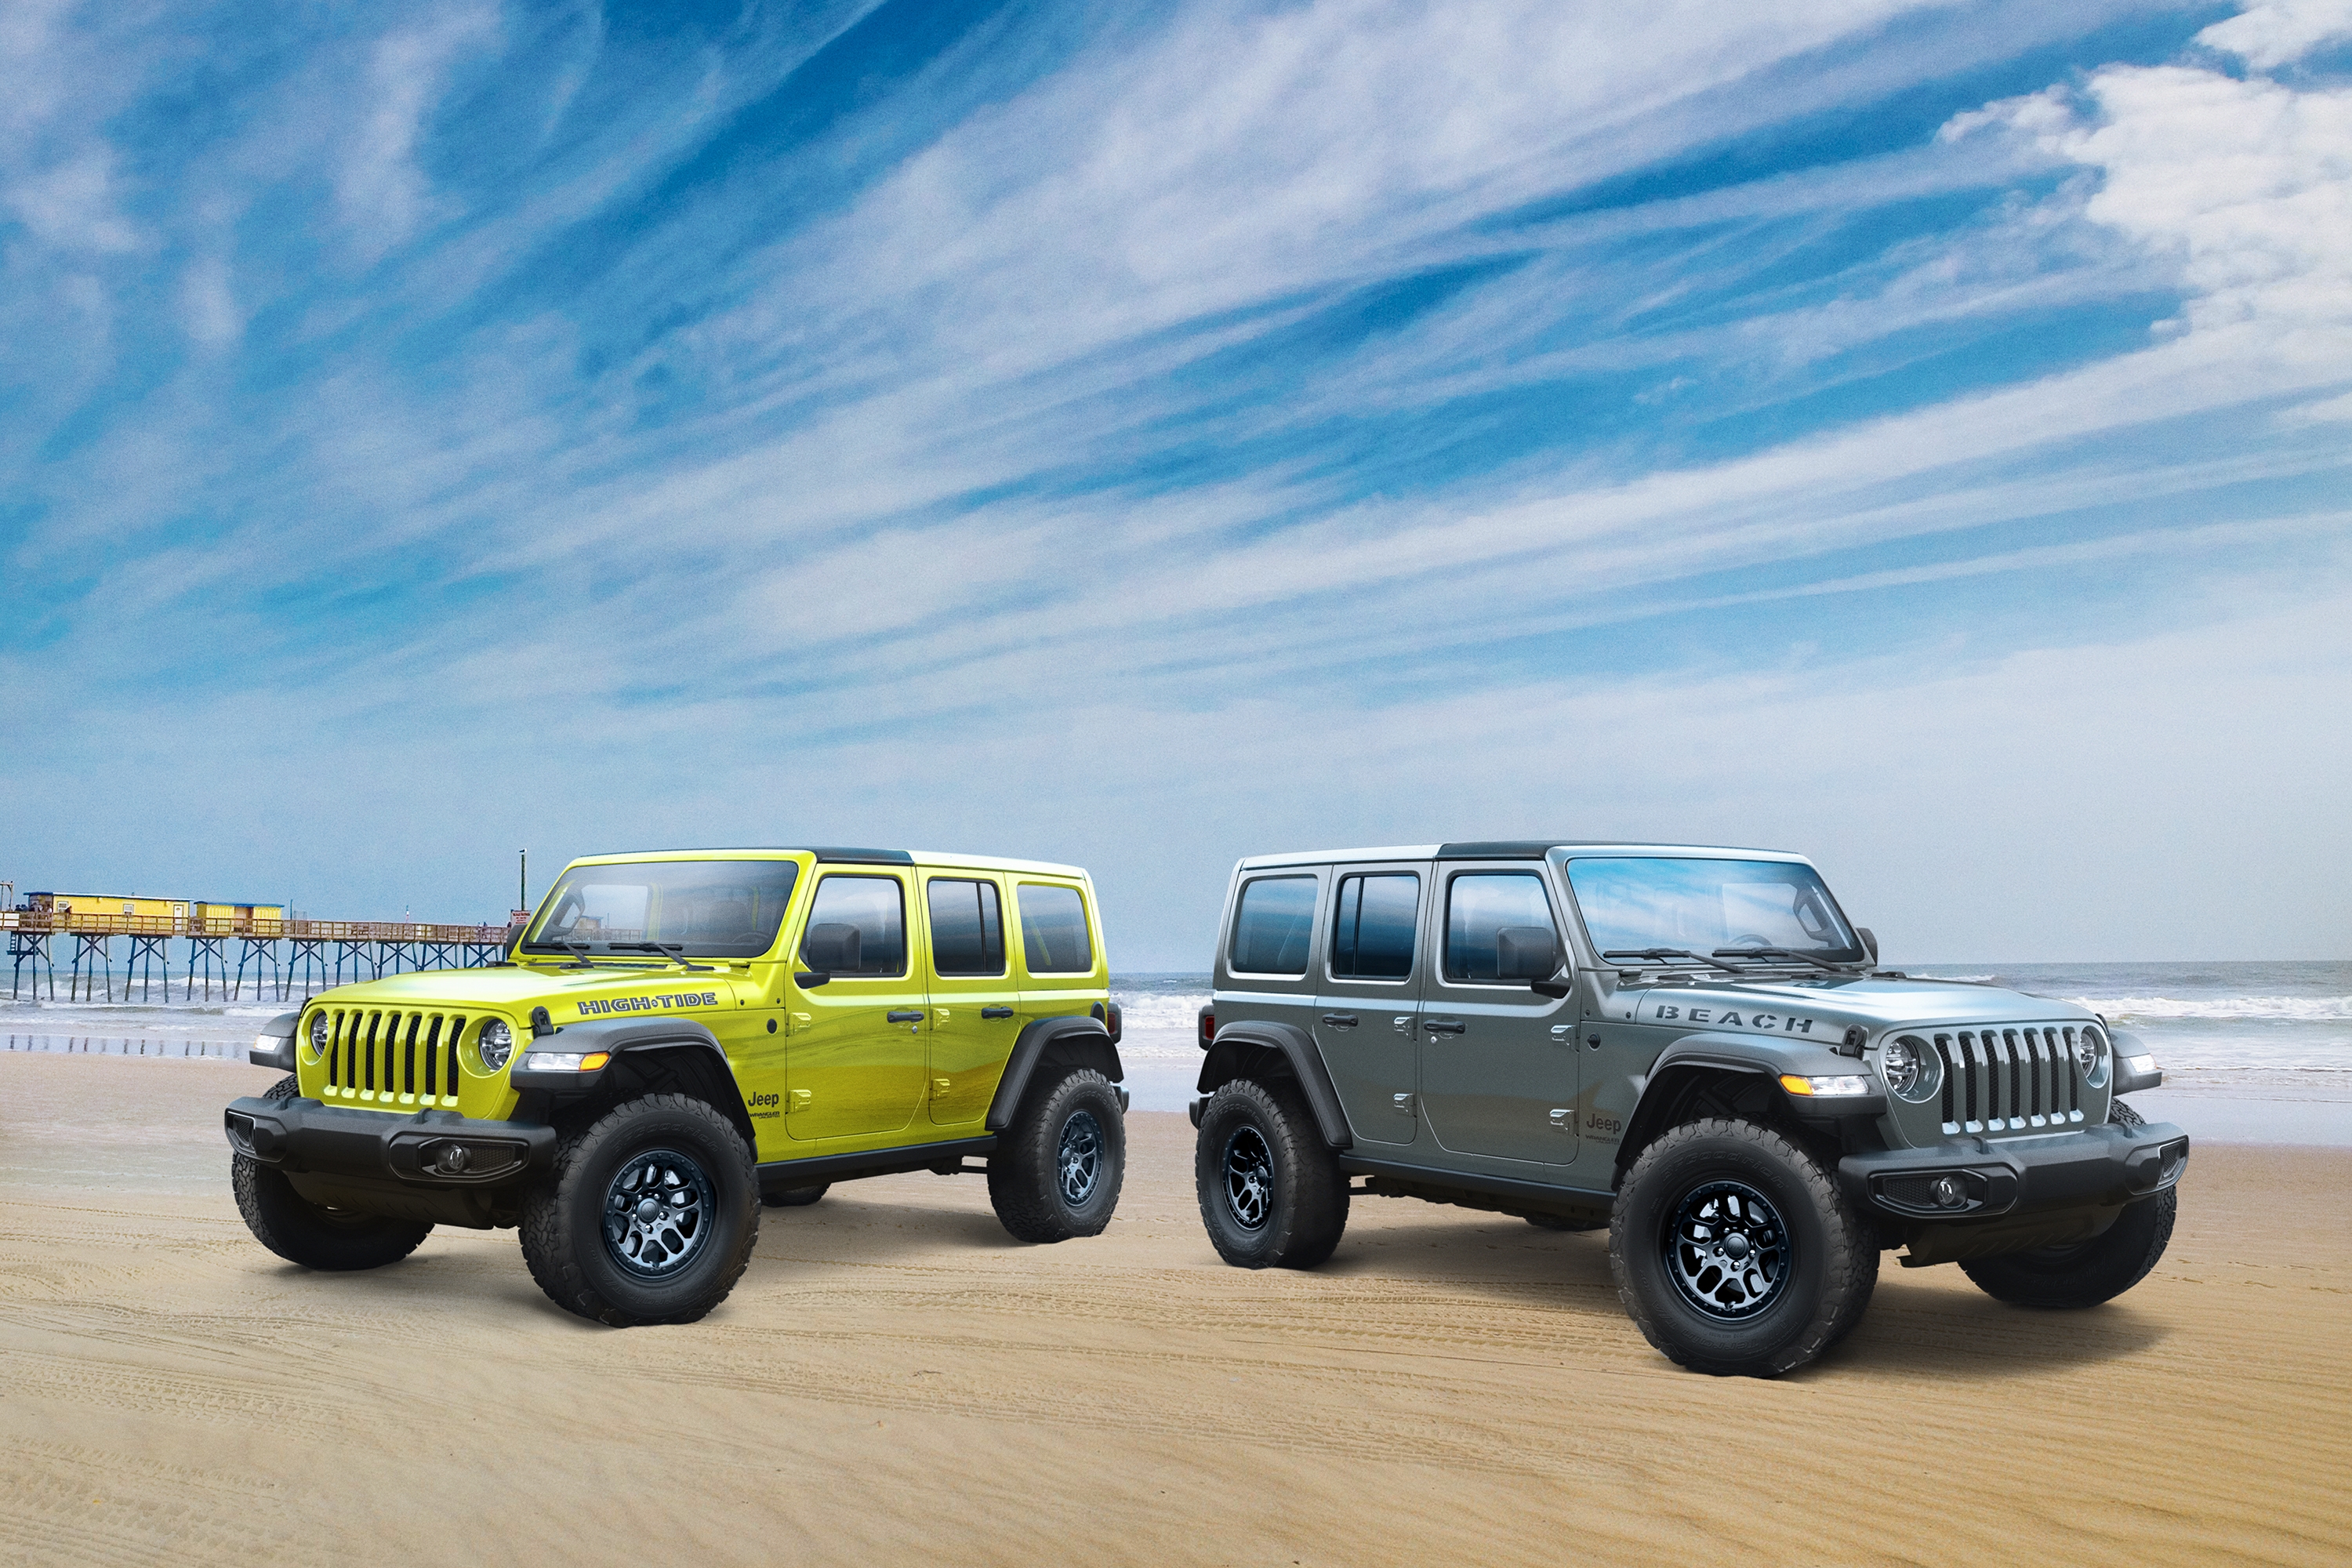 Jeep Wrangler Launches “High Tide” Model and New “High Velocity” Yellow